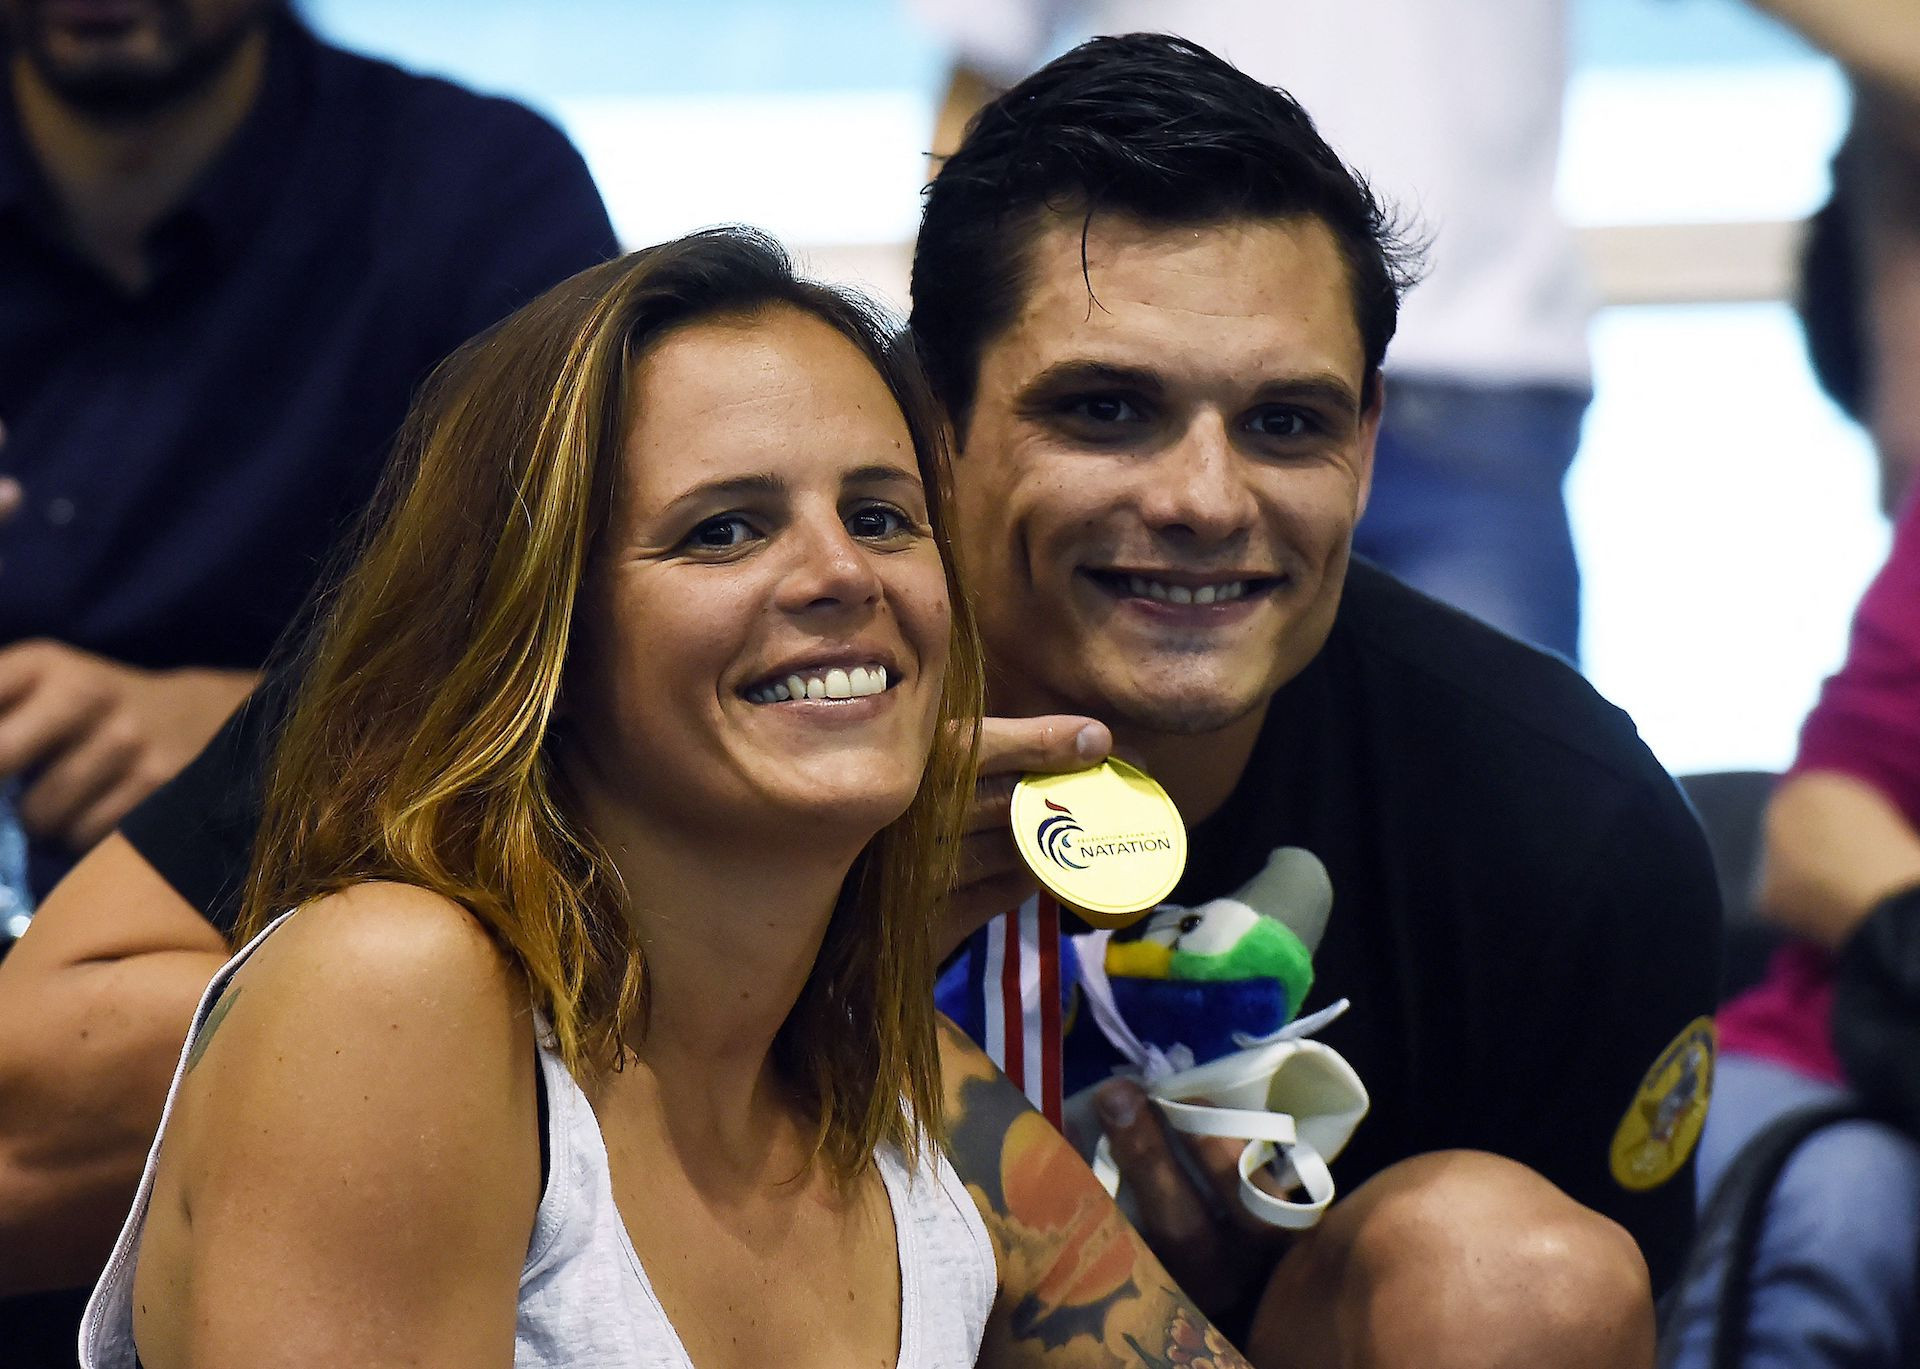 Florent Manaudou poses with his medal next to his sister Laure Manaudou at the final of the French swimming championships. GETTY IMAGES